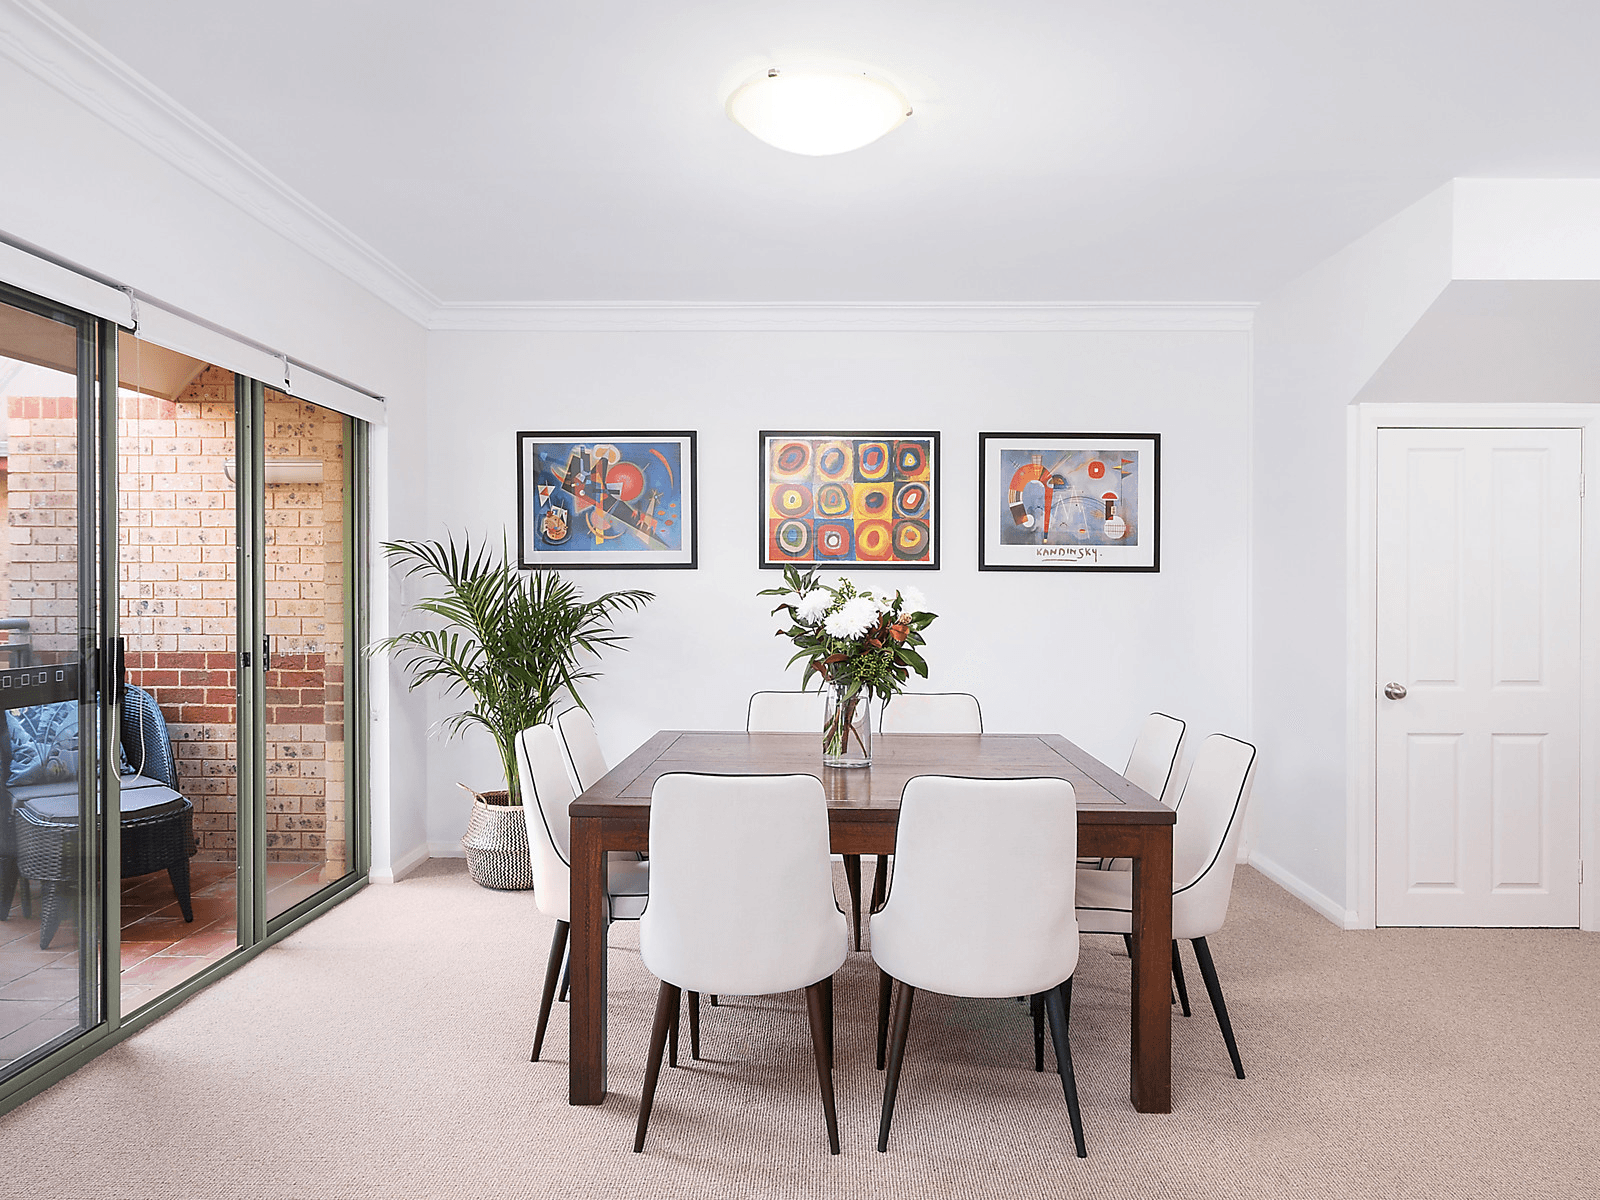 11/1-5 Penkivil Street, Willoughby, NSW 2068